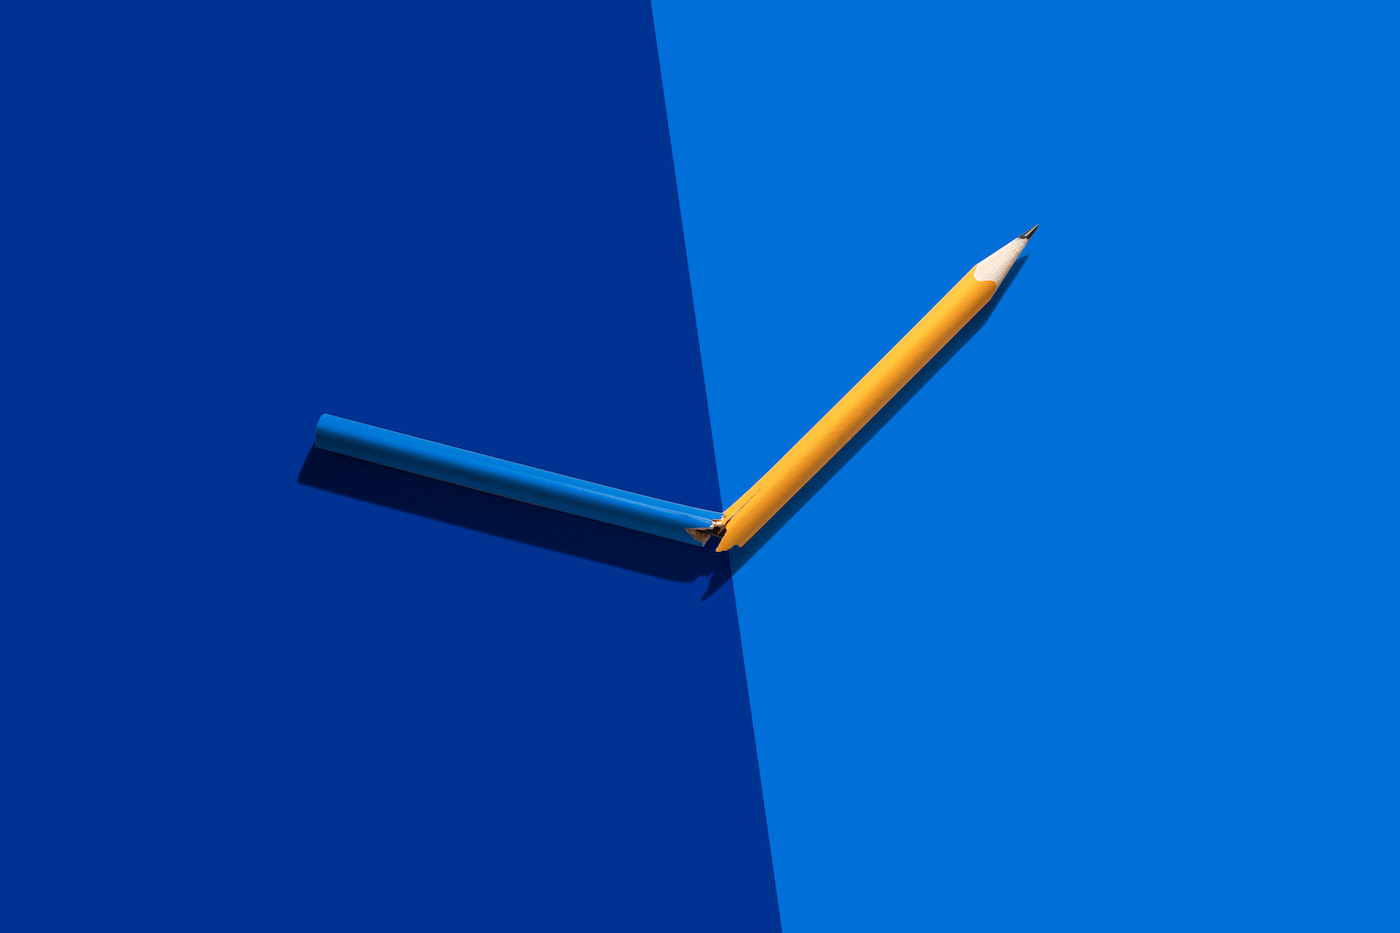 Pencil Cracked into Two Colors on Solid Color Block Background.